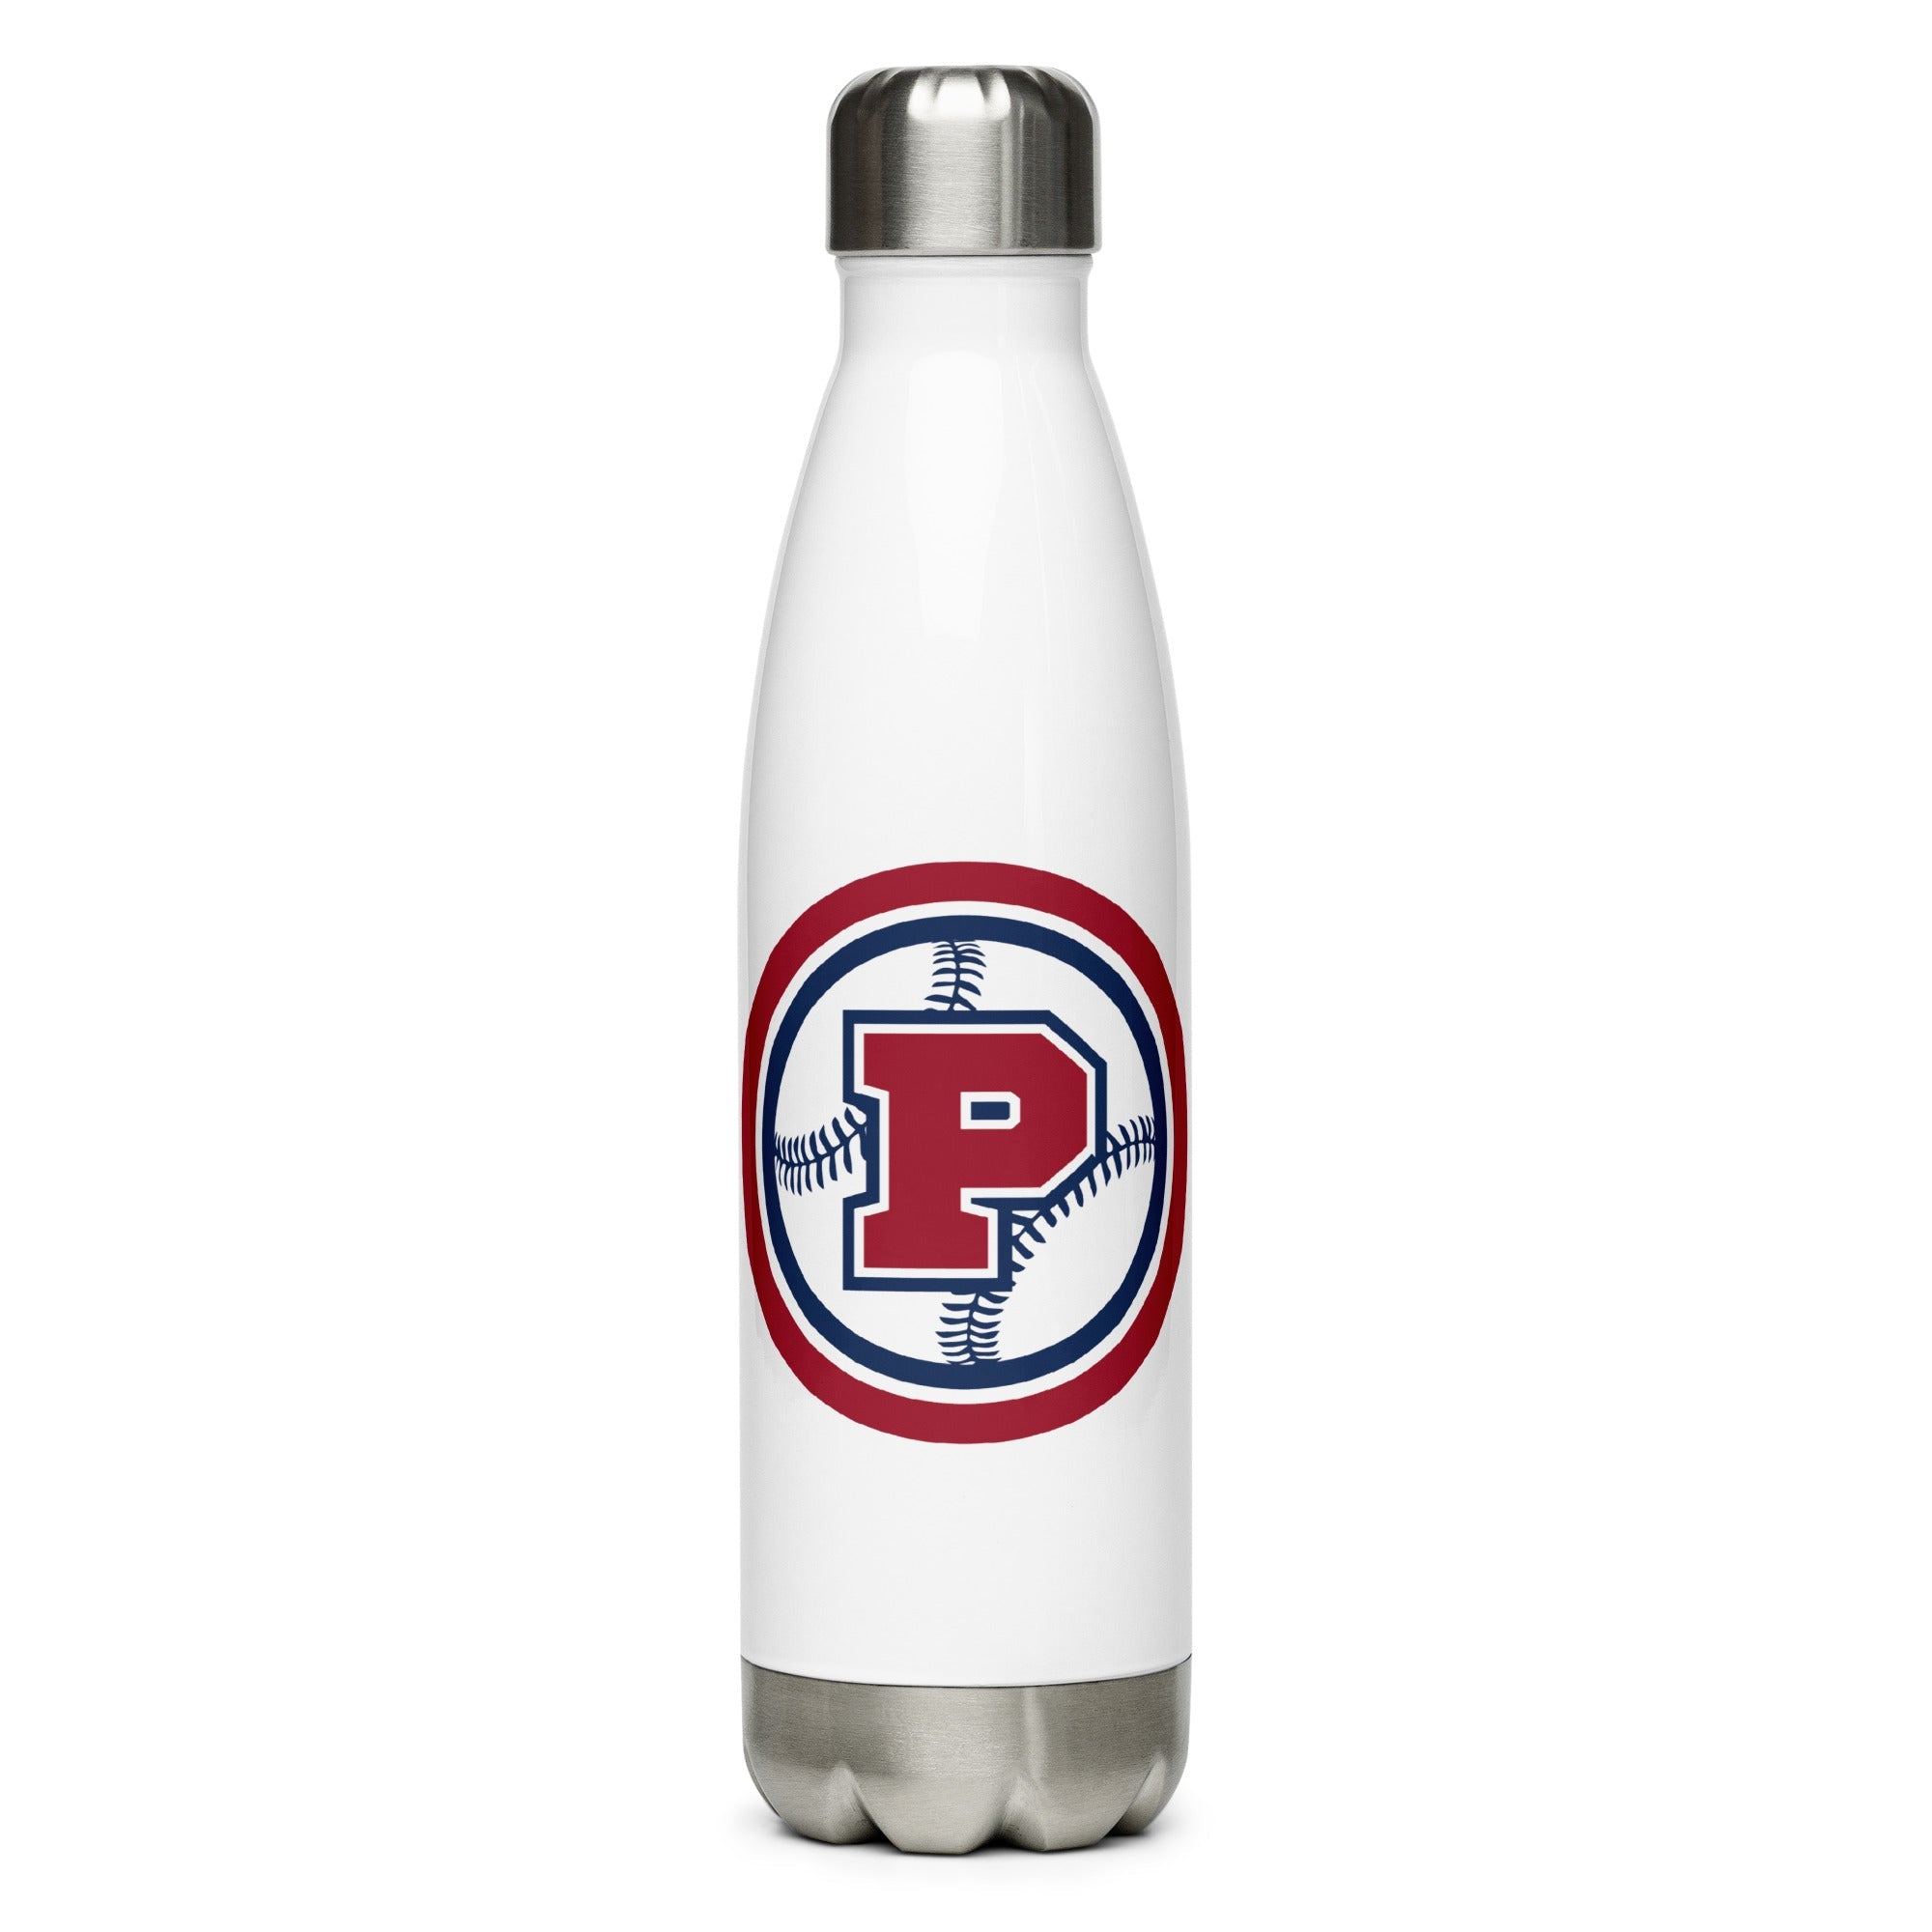 PAB Stainless Steel Water Bottle